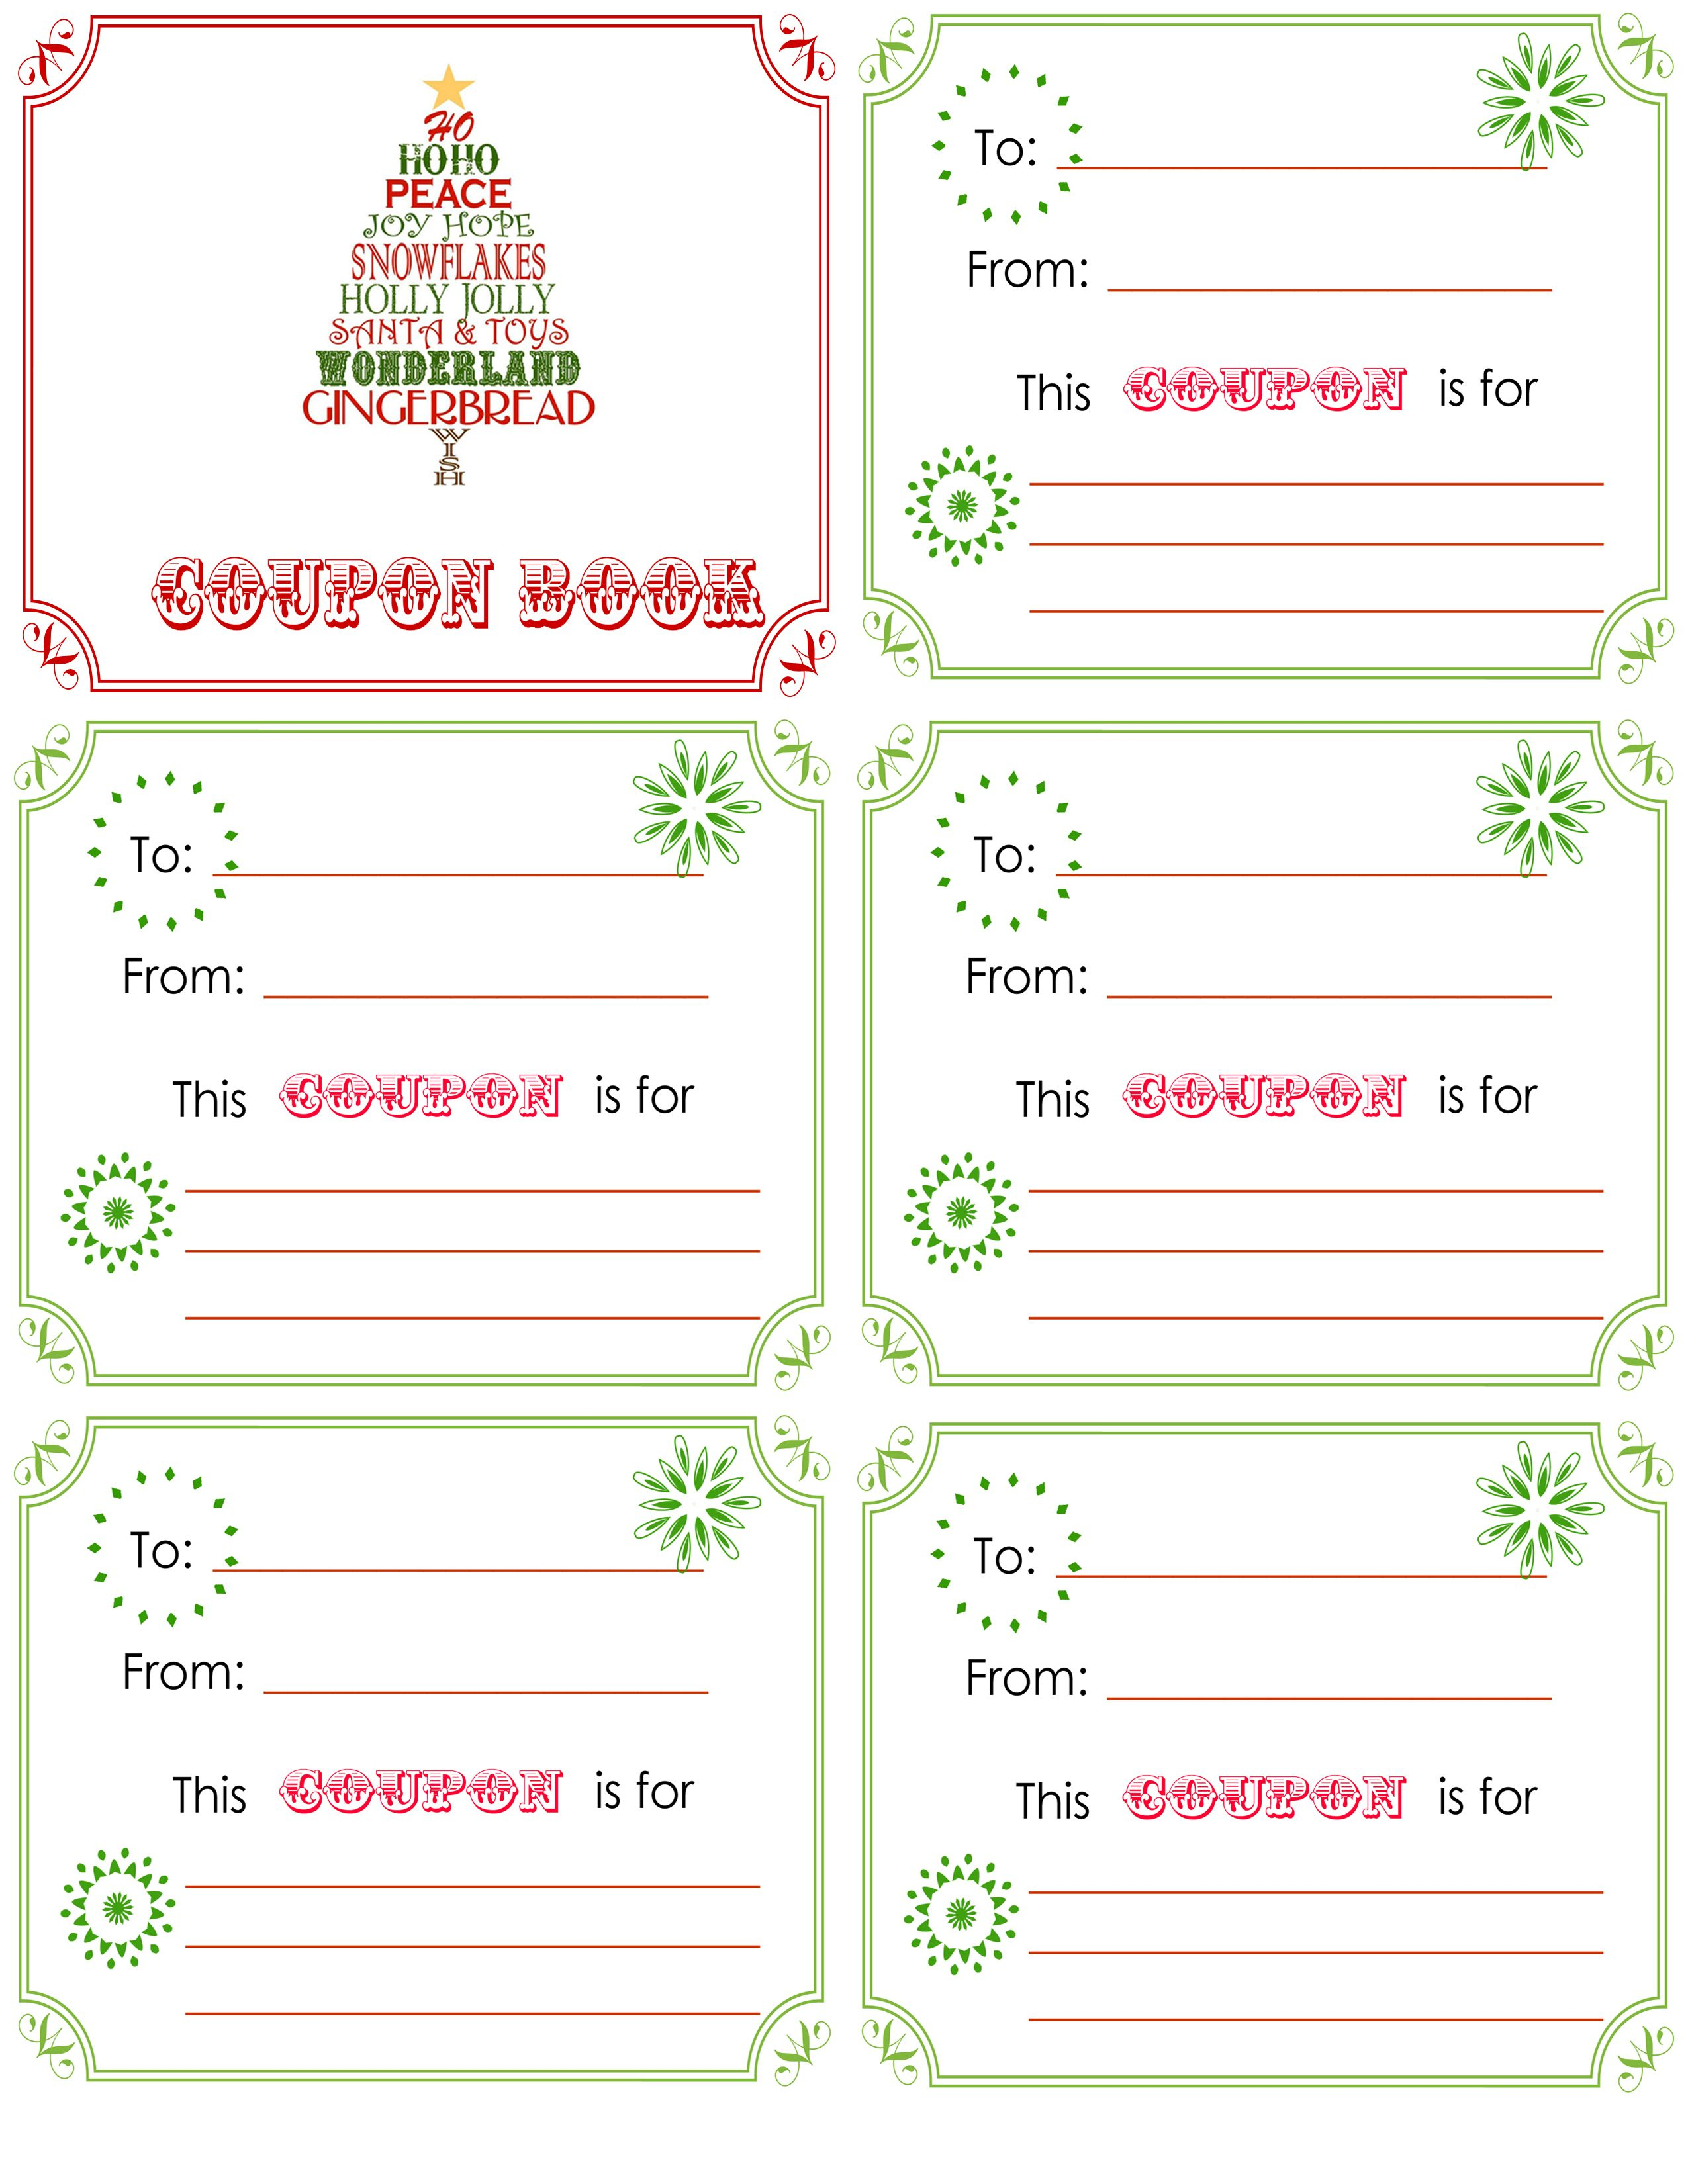 Printable Christmas Coupon Book. L Is Getting 15 Minute Added To - Free Printable Xmas Gift Certificates